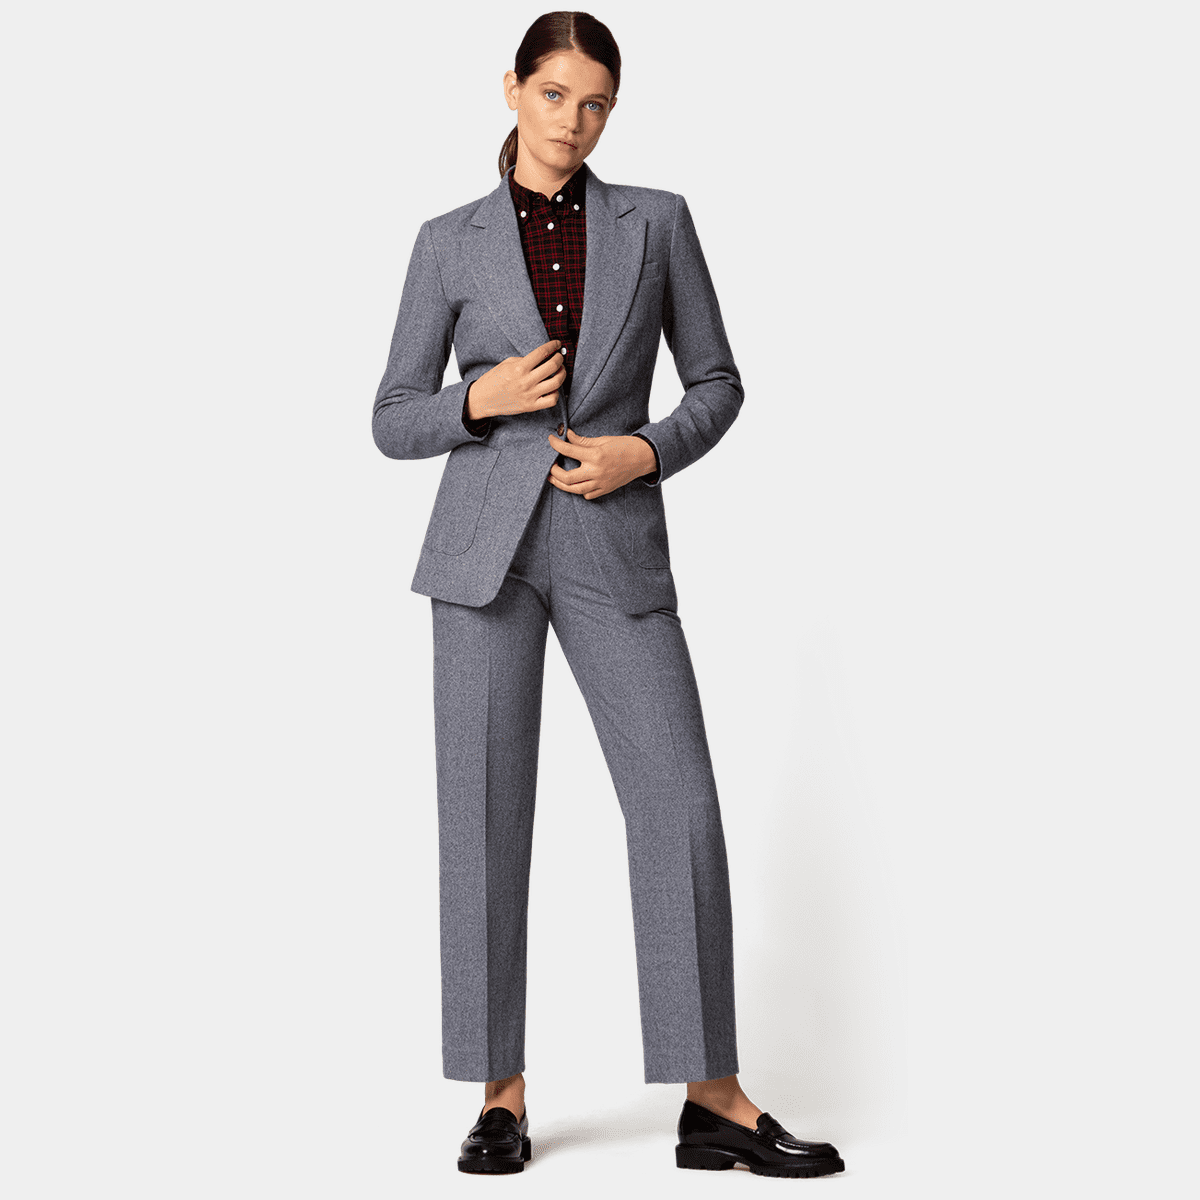 Women's Dark Grey Check Tweed Suit, Three Piece with Trousers - That  British Tweed Company